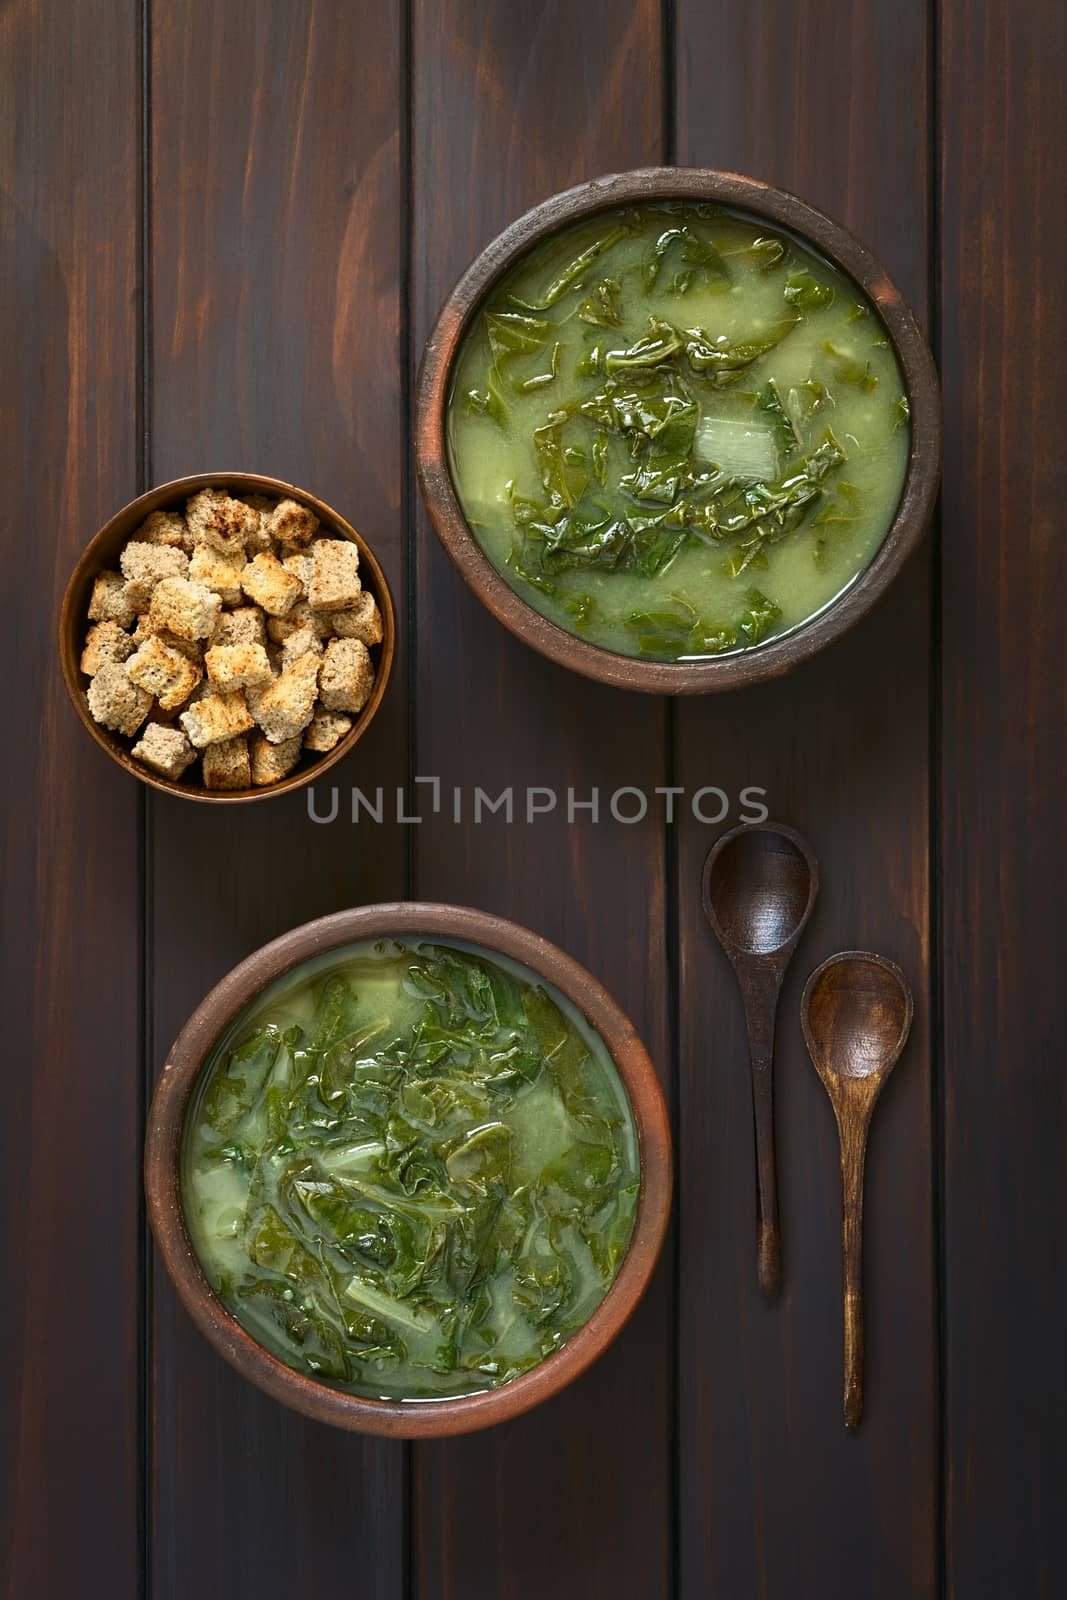 Chard Soup and Croutons by ildi